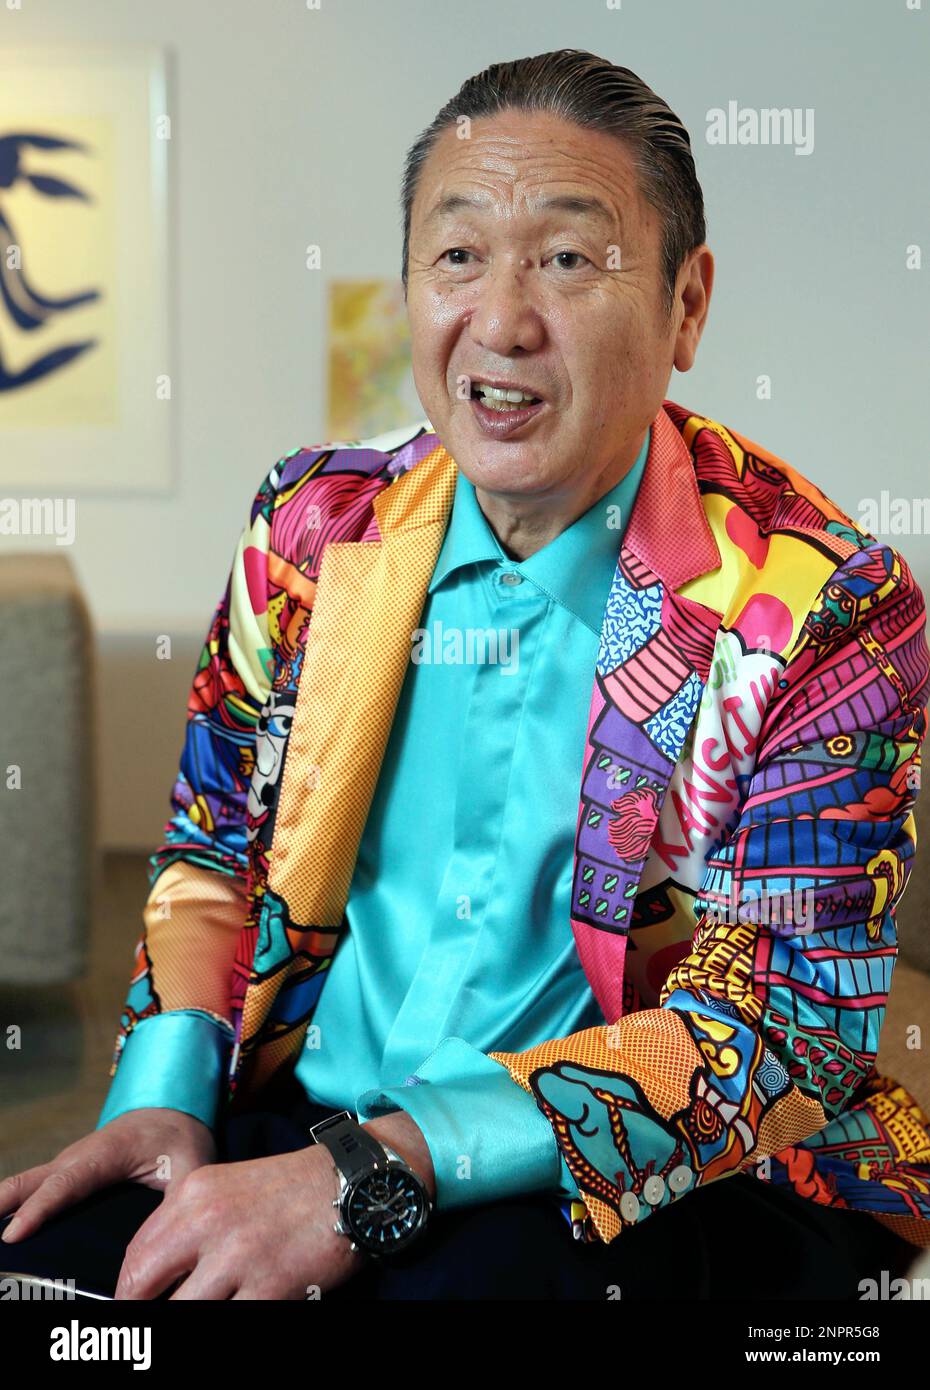 A file photo shows Japanese fashion designer Kansai Yamamoto speaks during  an interview in Tokyo on April 23, 2013. 76-year old Yamamoto made his  debut in 1971 as the first Japanese and